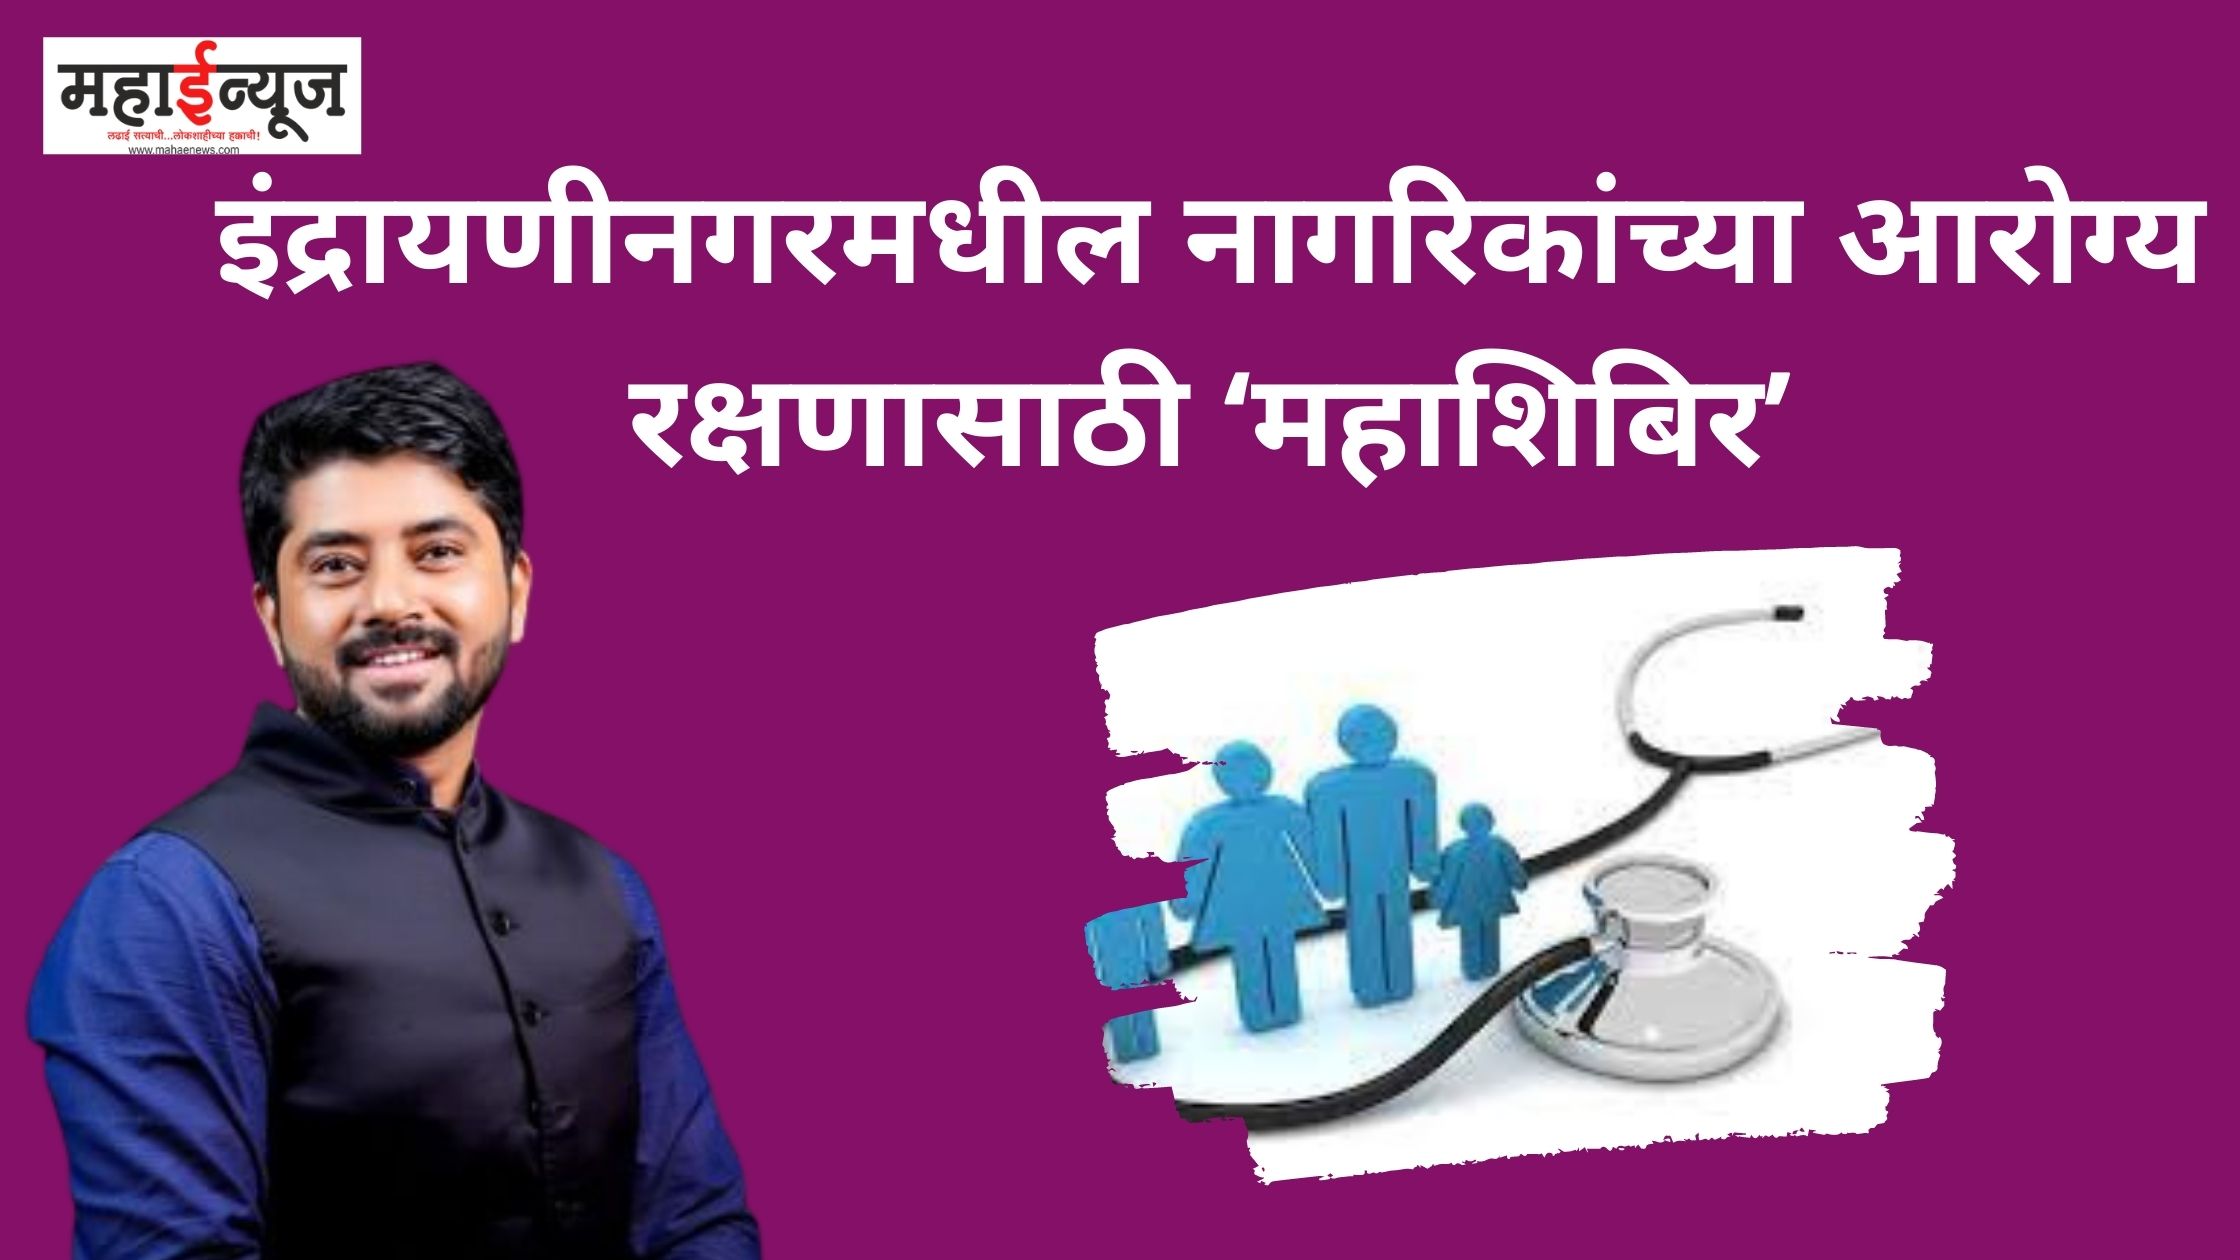 'Mahashibir' for health care of citizens of Indrayanagar